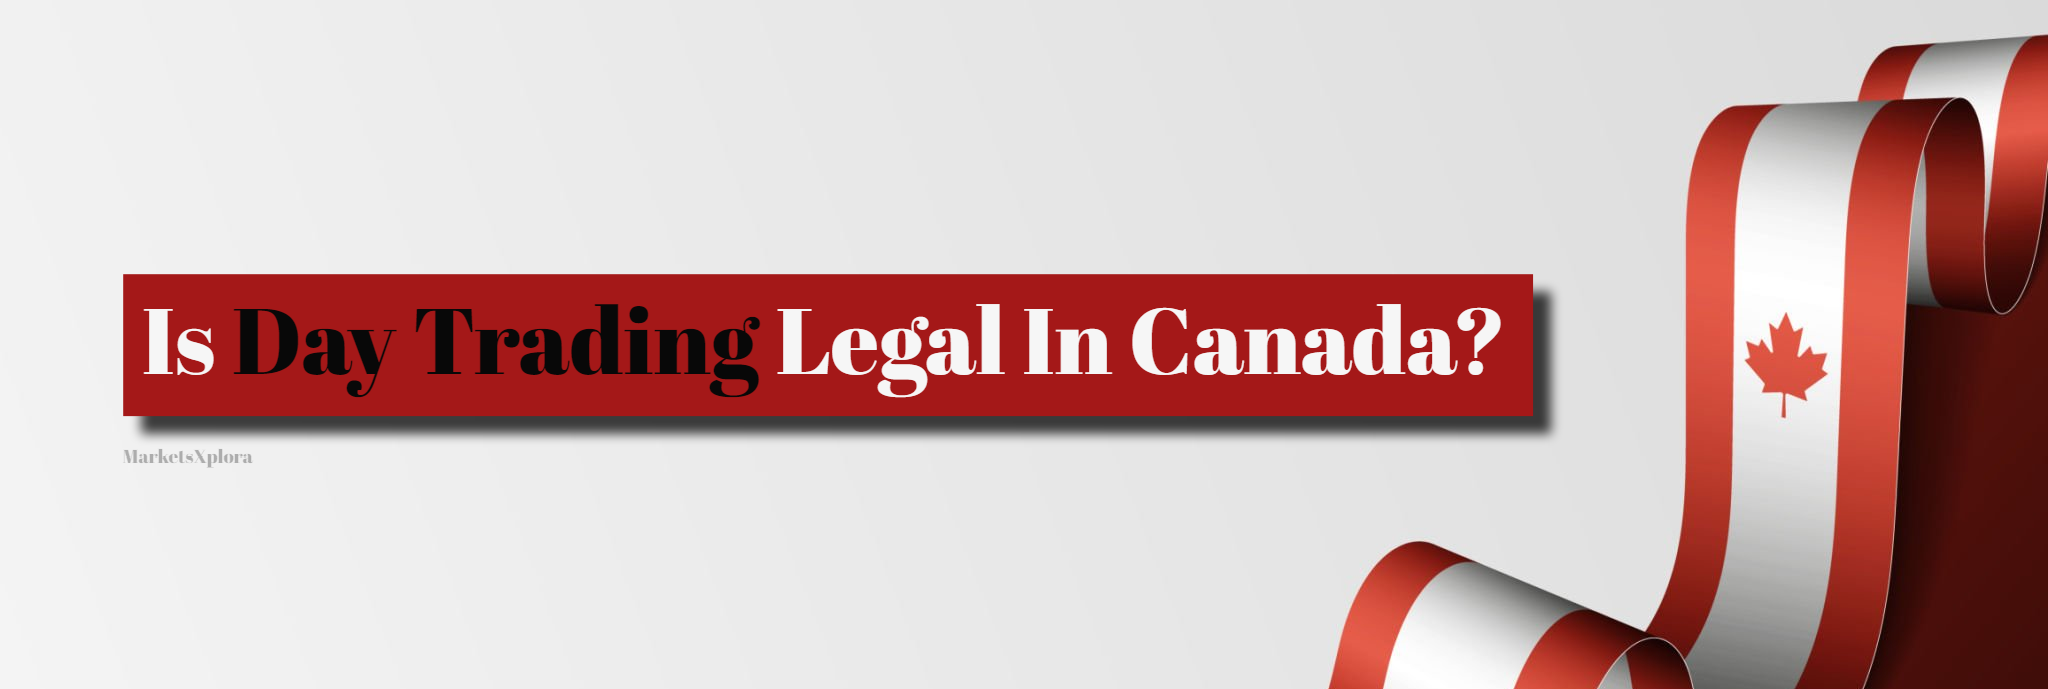 Before you trade - is day trading legal in Canada? Find out now and learn key tax rules, leverage risks, and prudent steps to take as a beginner.